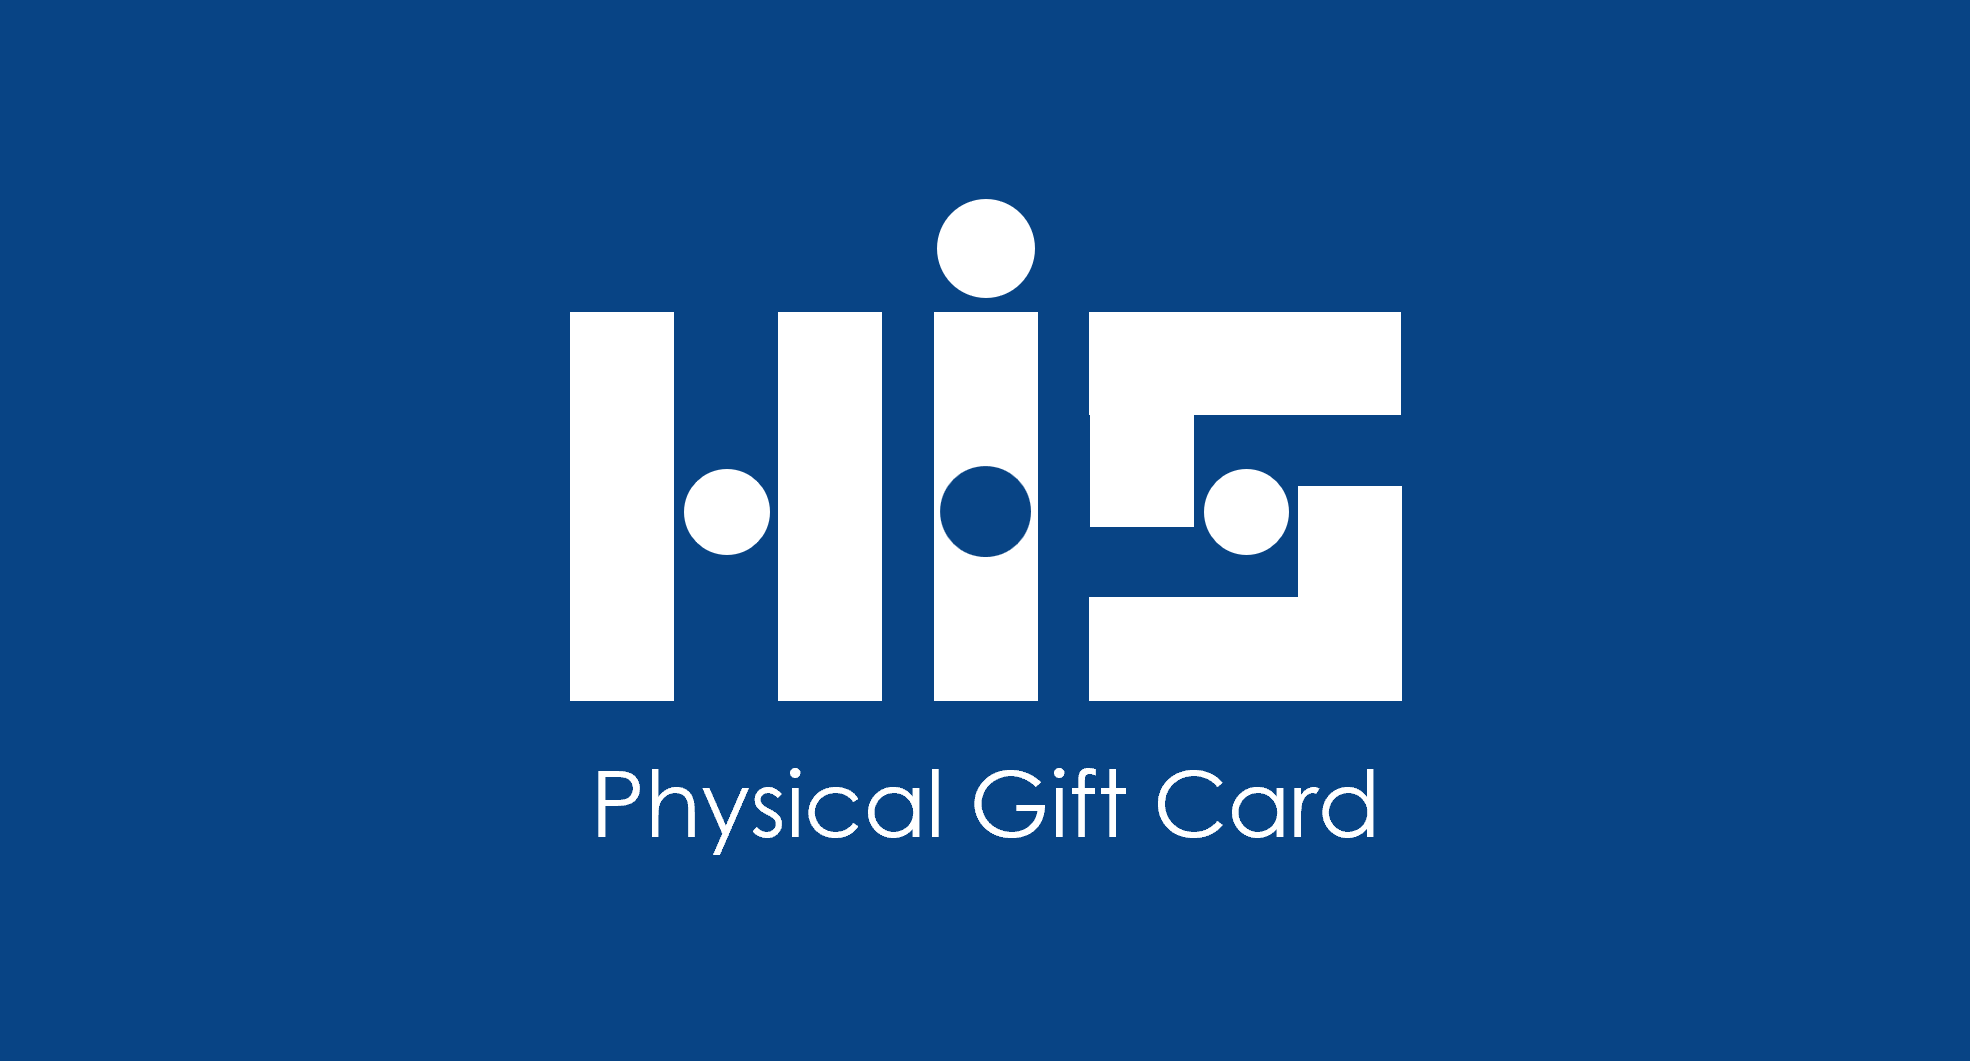 Physical Gift Card - Must be used in store